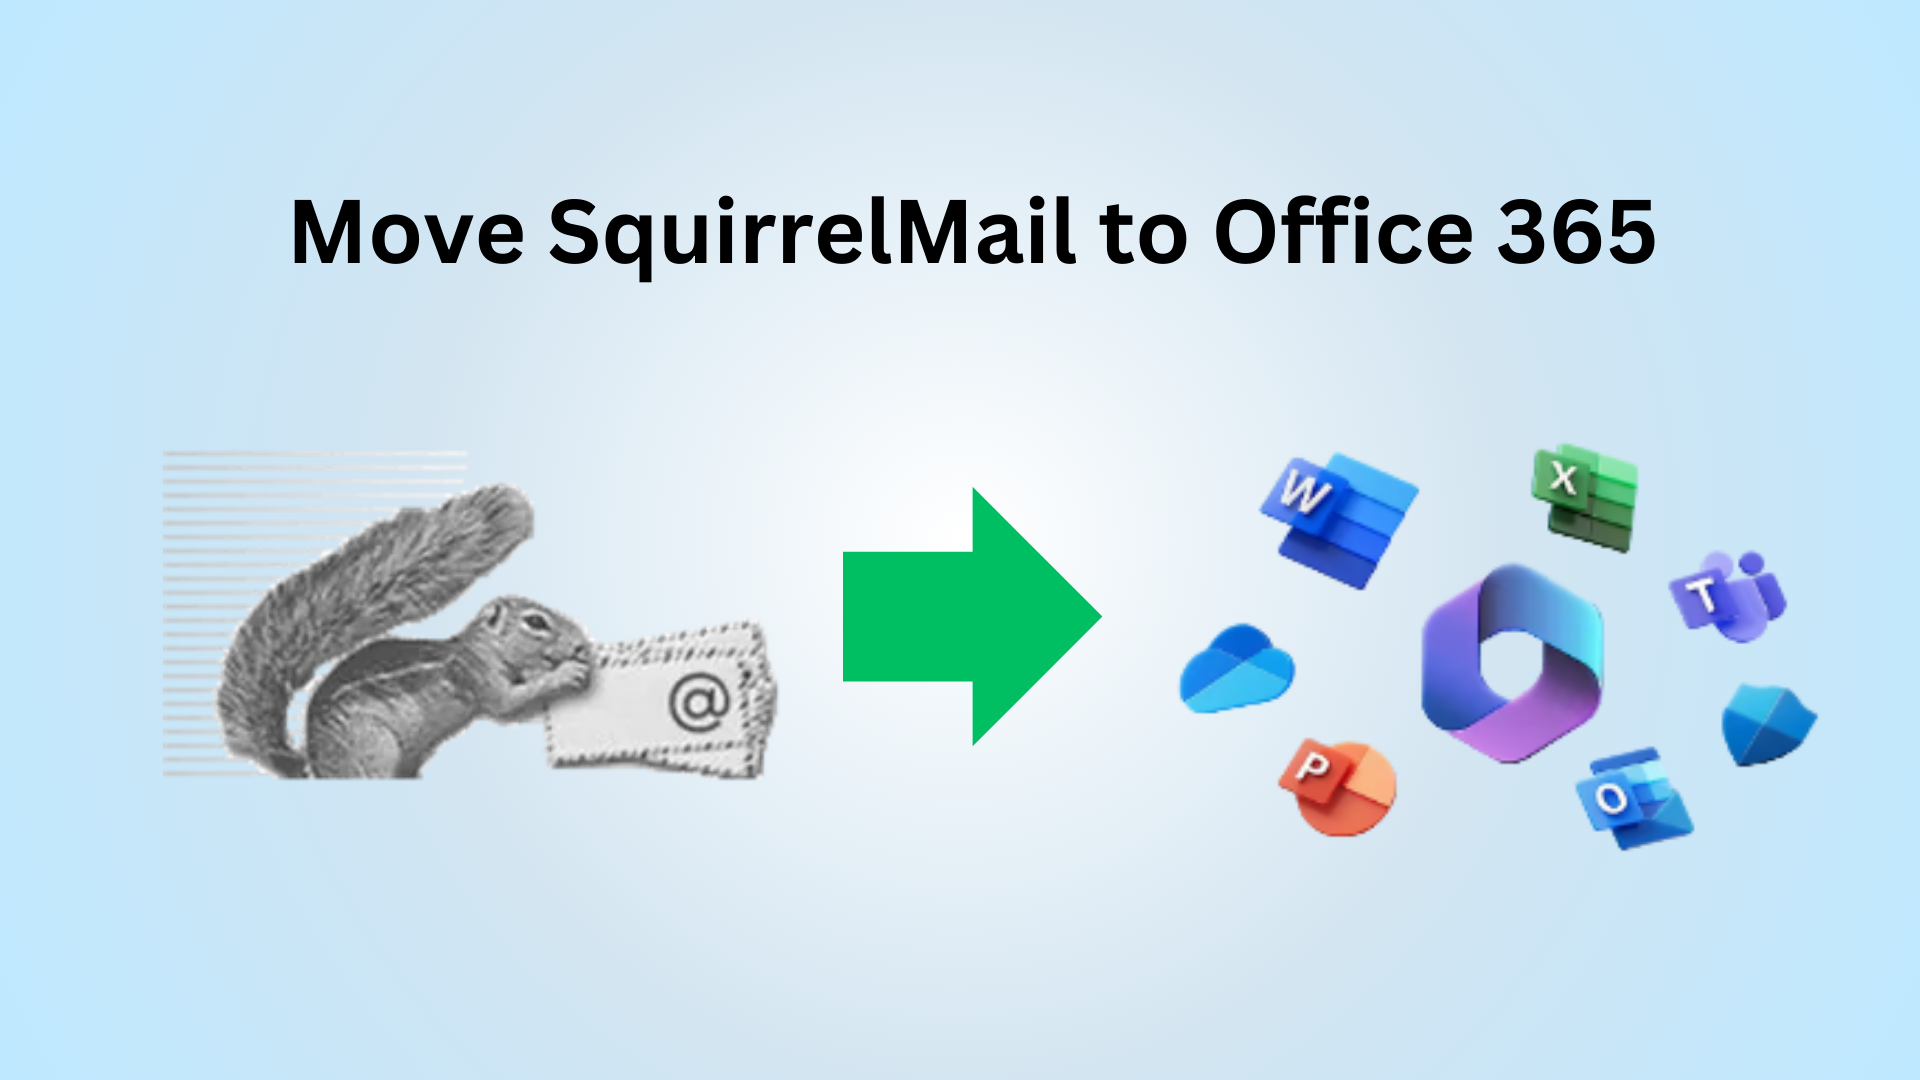 Migrate SquirrelMail to Office365